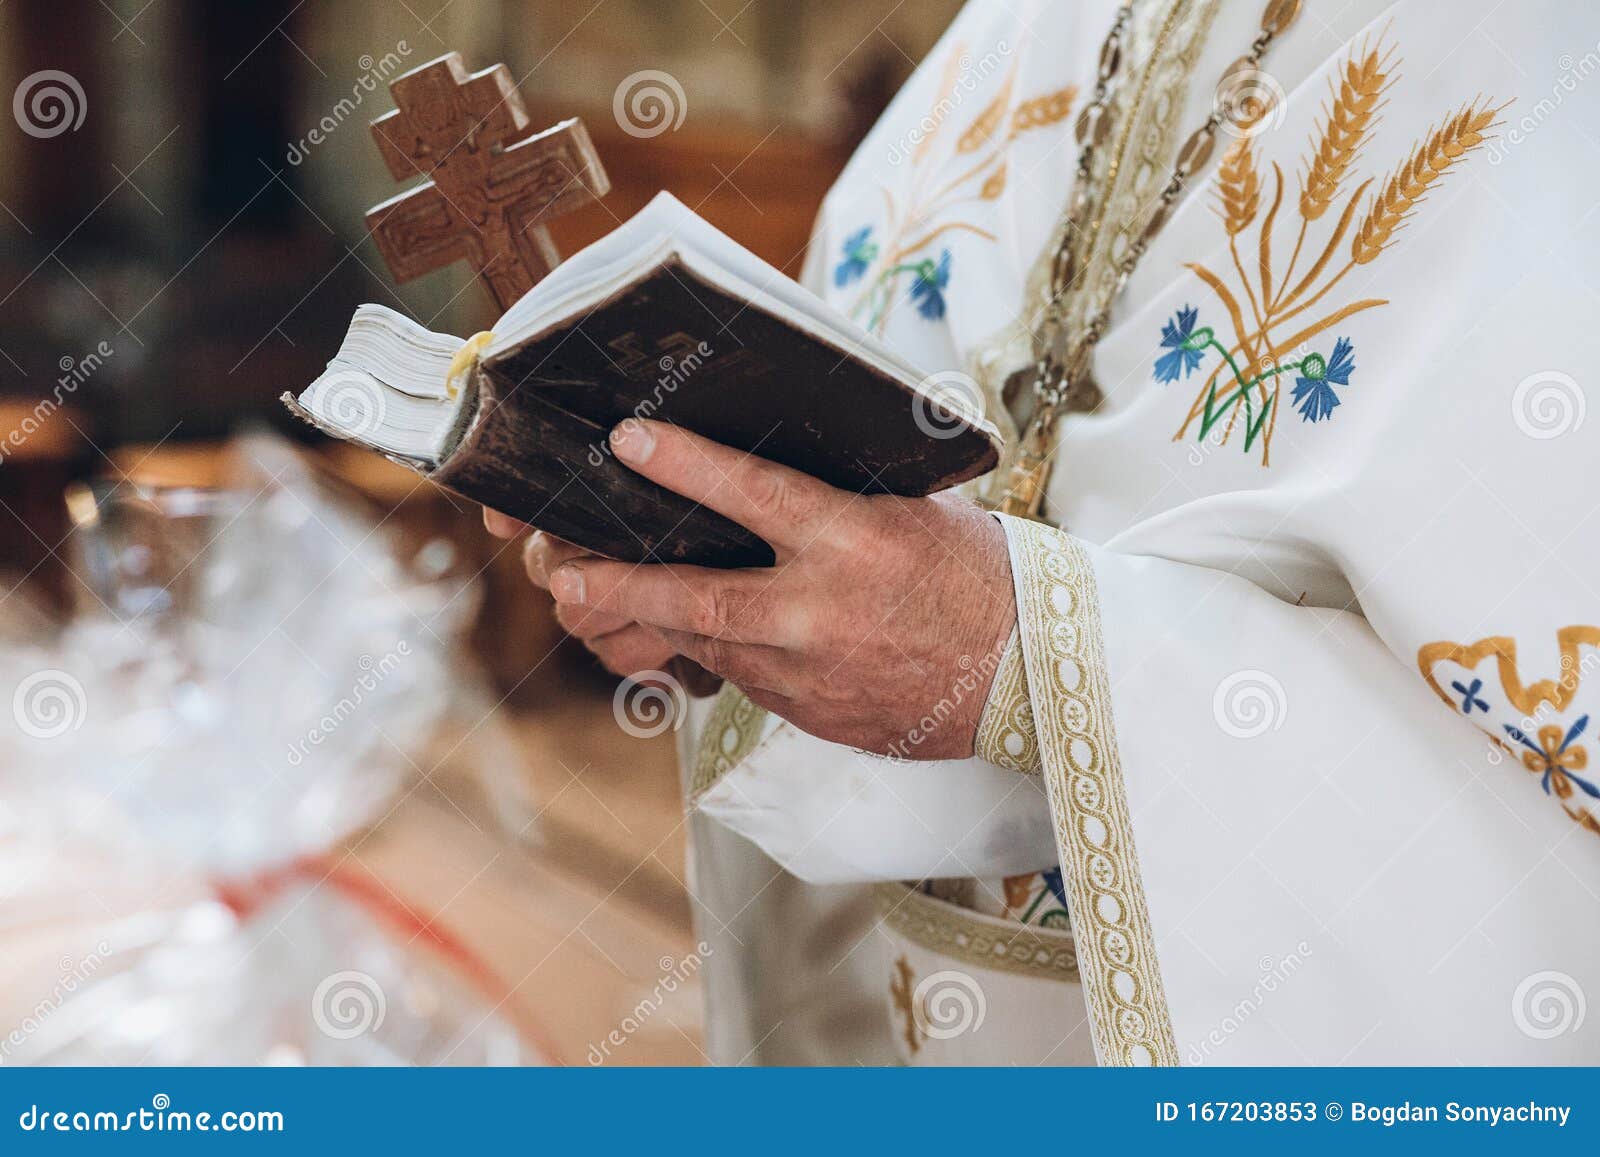 7 153 Church Man Priest Photos Free Royalty Free Stock Photos From Dreamstime